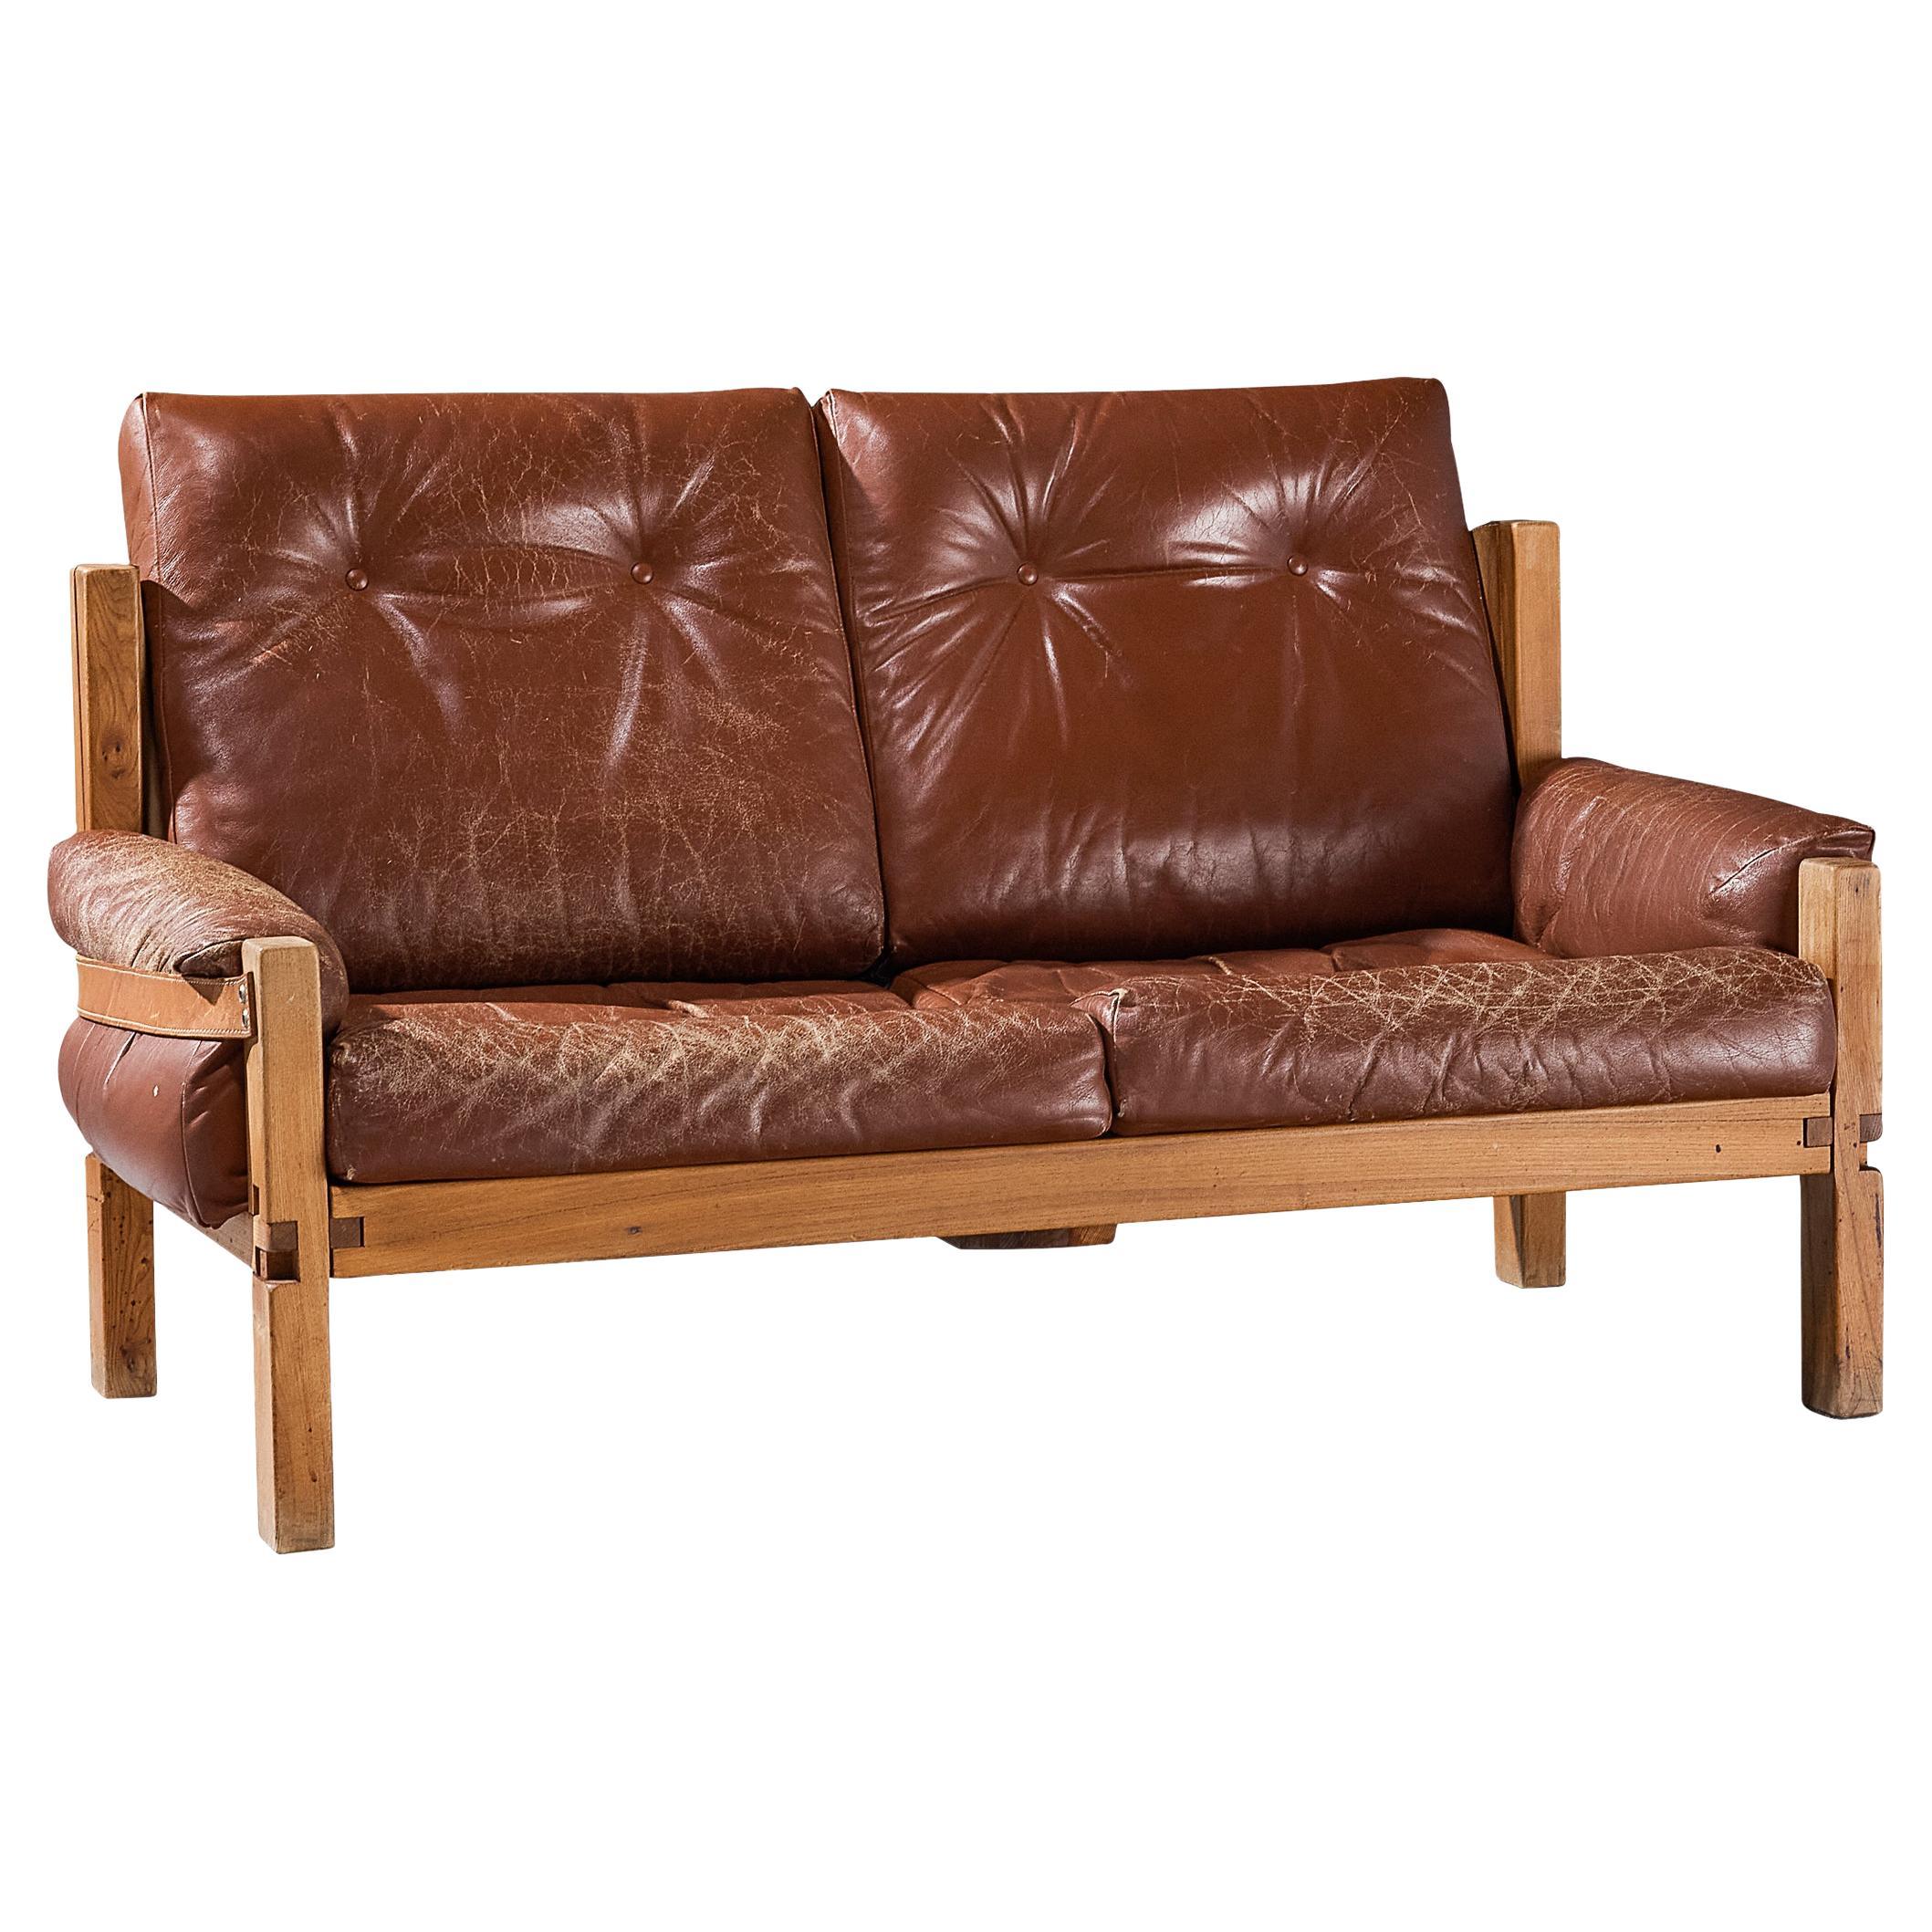 Early Pierre Chapo 'S22' Sofa in Elm and Leather For Sale